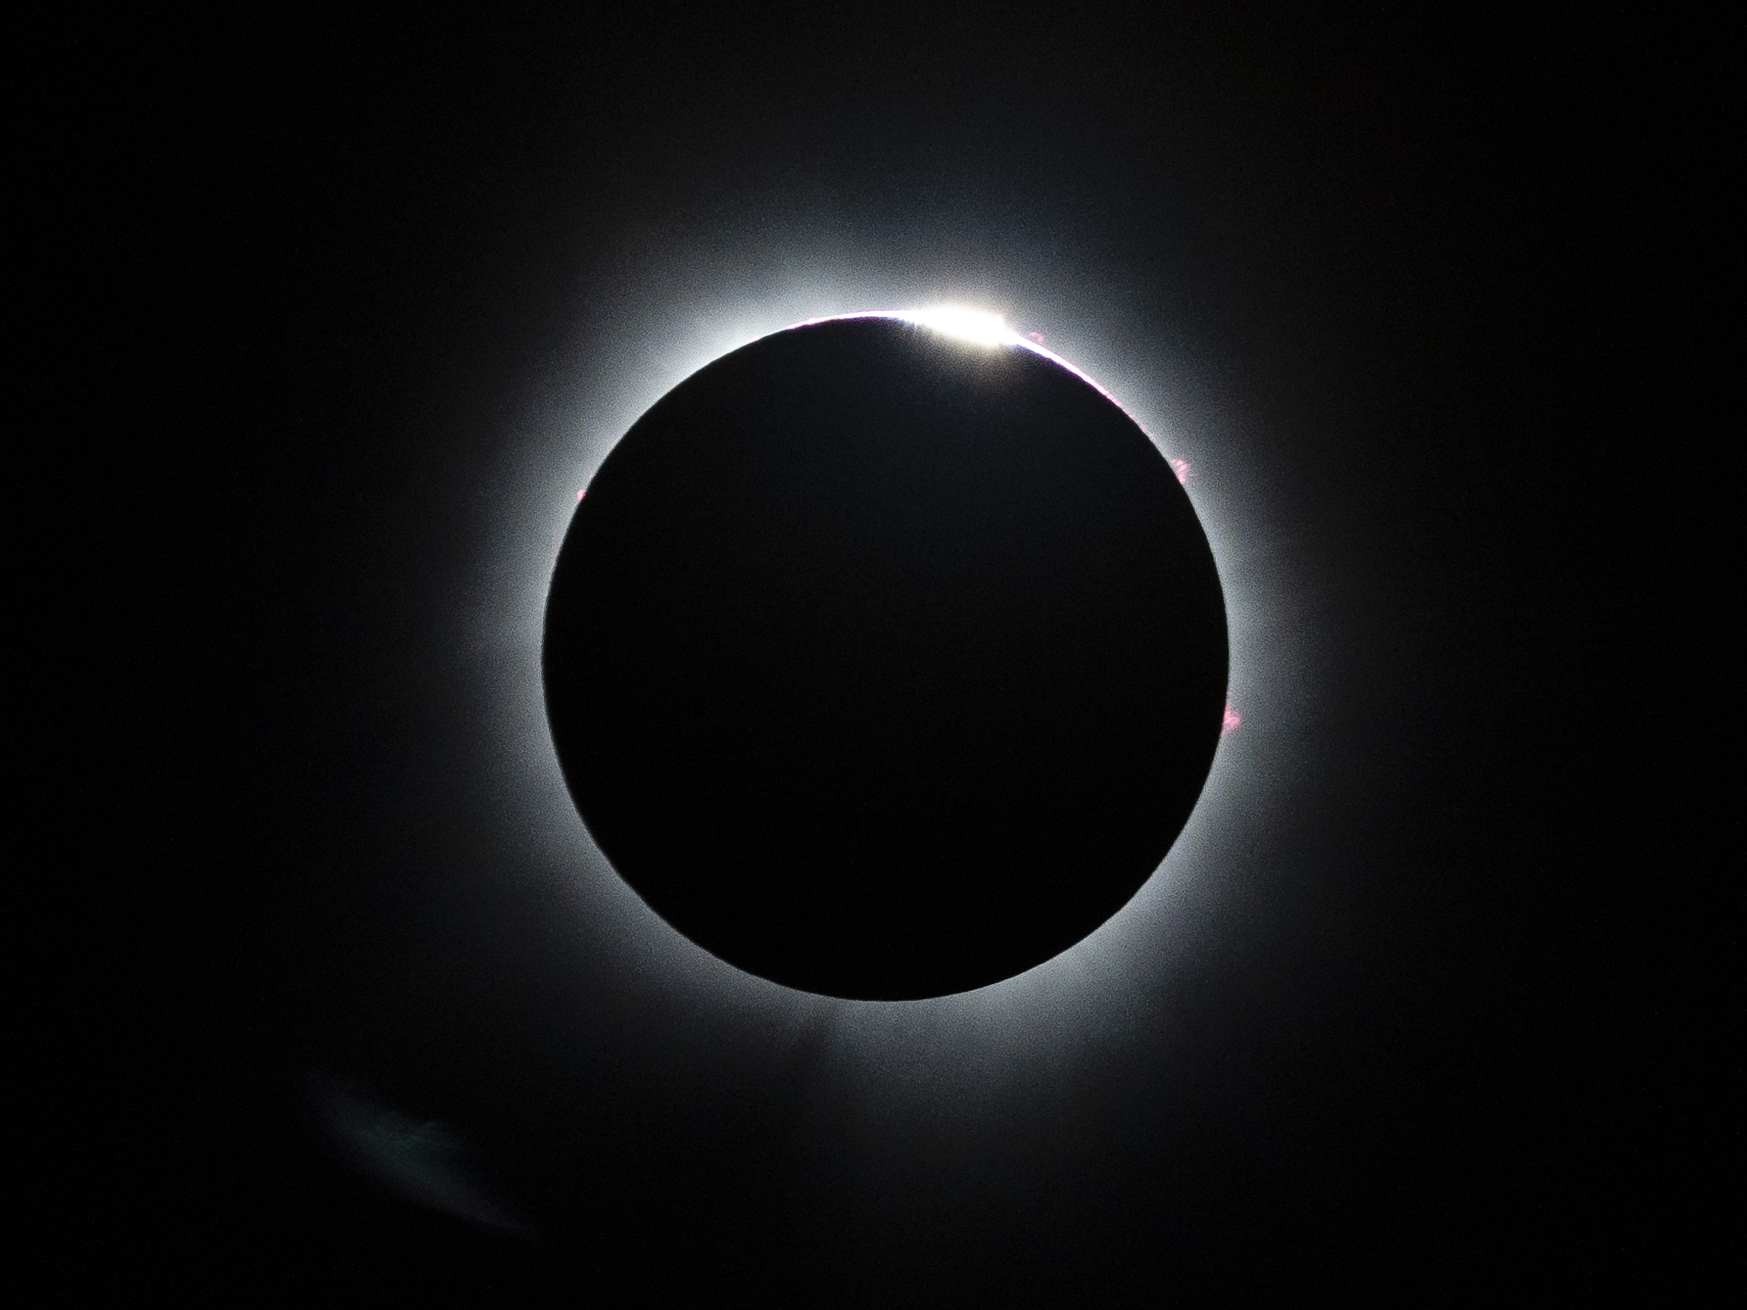 A rare solar eclipse darkened skies and dazzled viewers across the U.S.